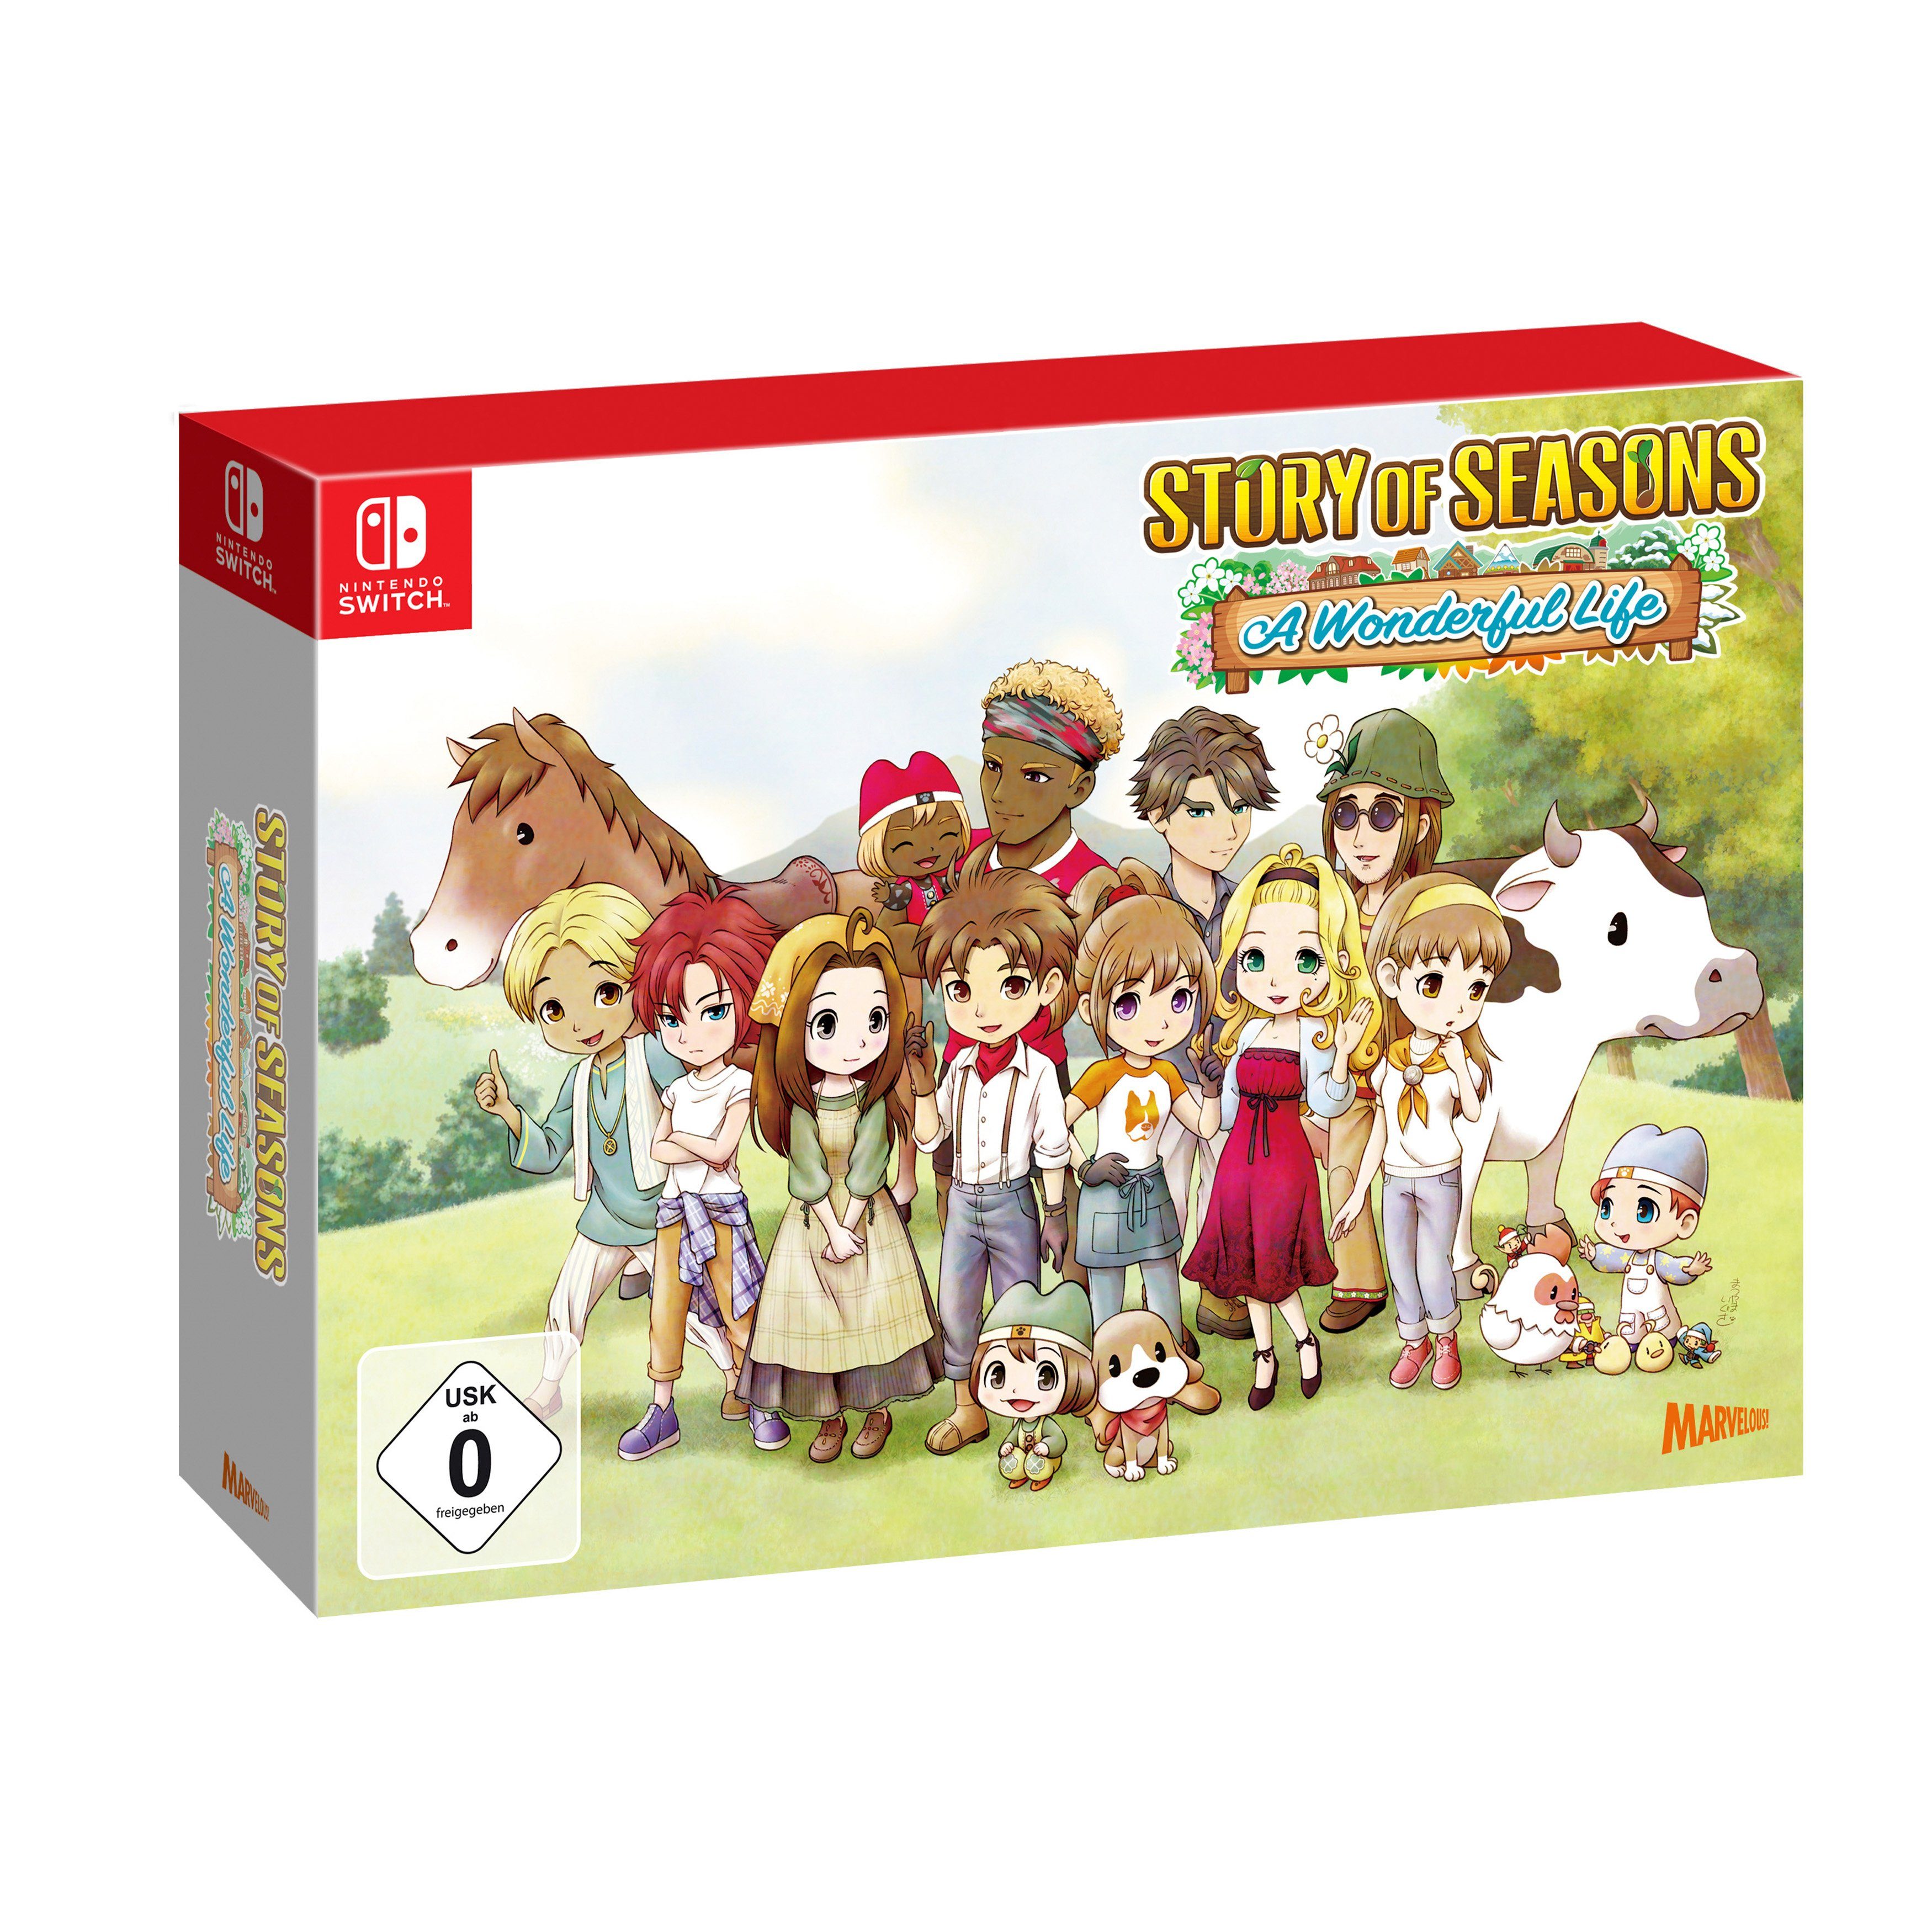 Switch, Limited Seasons: Nintendo Wonderful Edition Story Life Limited of Edition A